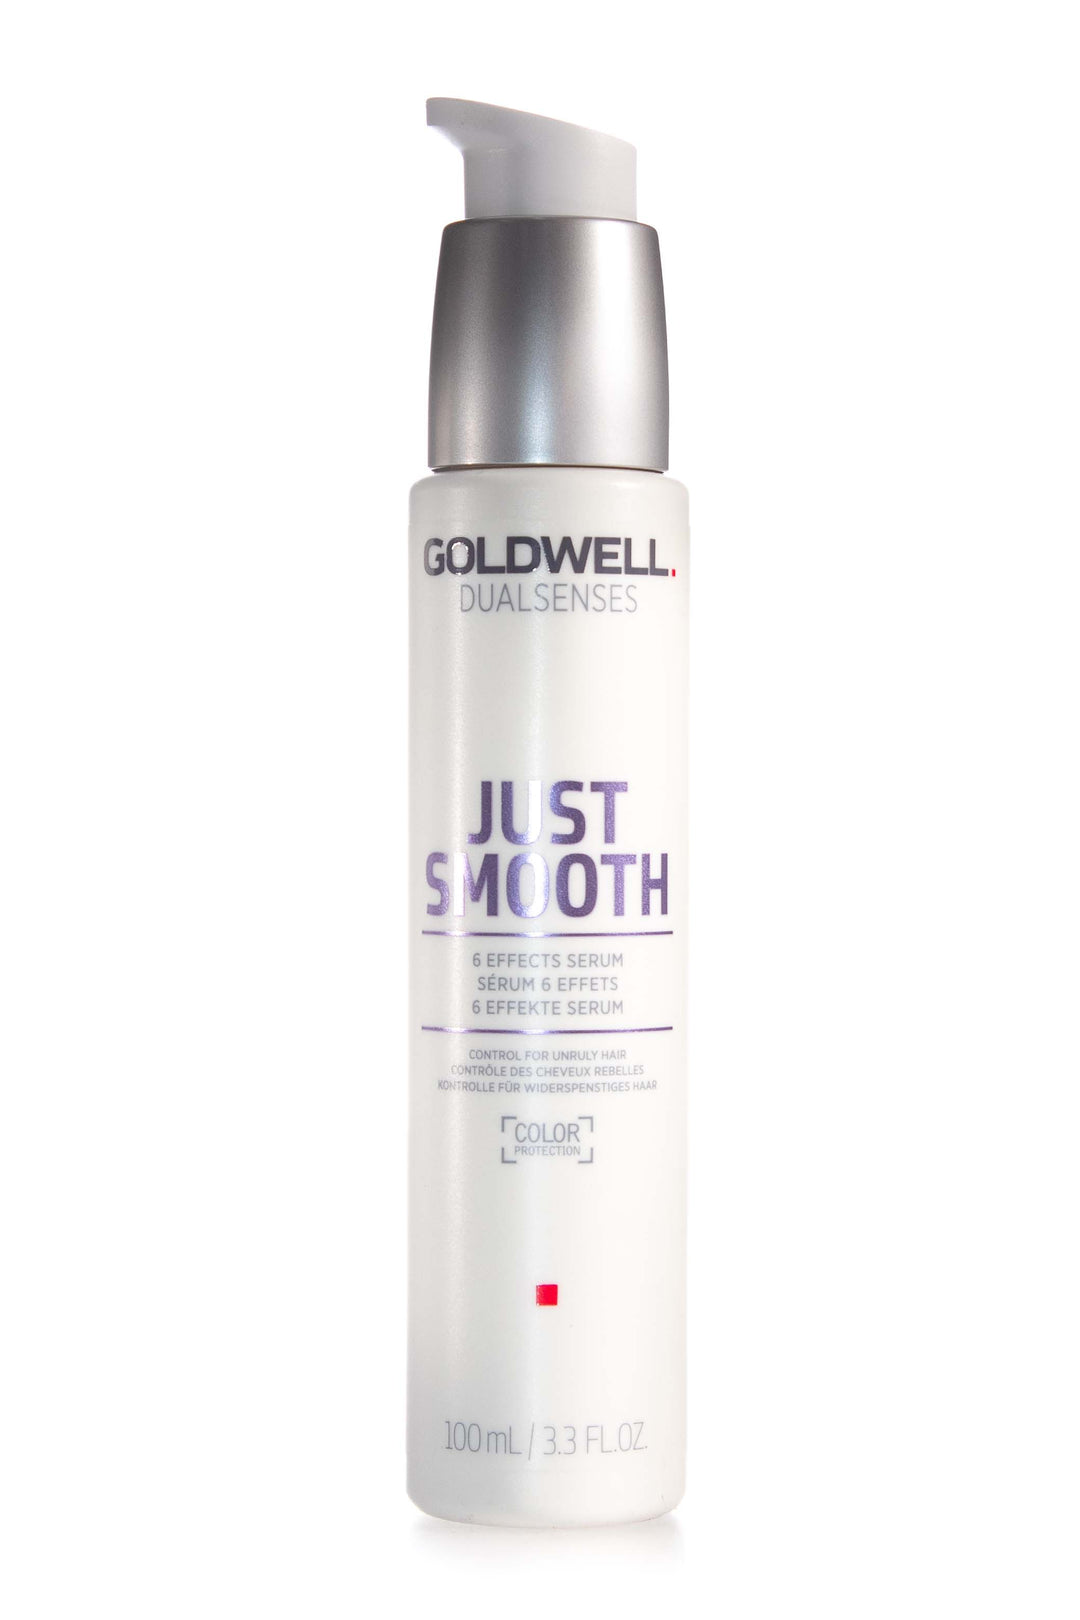 GOLDWELL Dual Senses Just Smooth 6 Effects Serum | 100ml